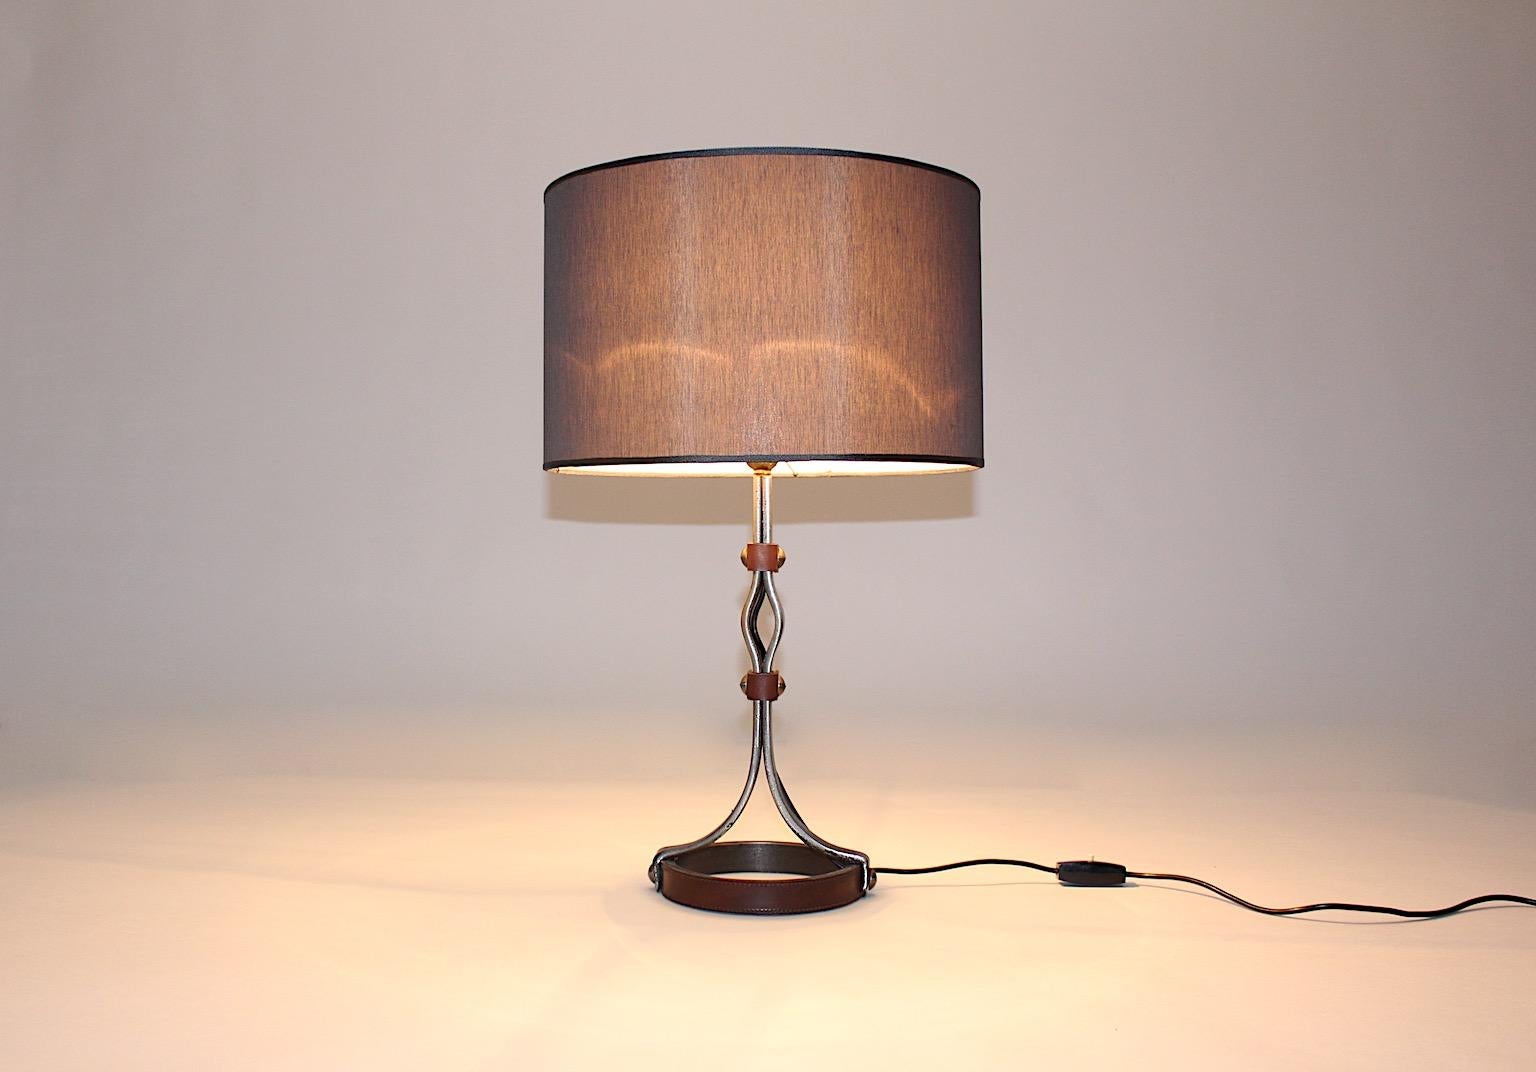 Mid-Century Modern vintage table lamp from iron and stitched leather attributed to Jacques Adnet 1950s France.
The beautiful table lamp from iron construction partly wrapped with stitched leather shows design which is attributed to Jacques Adnet